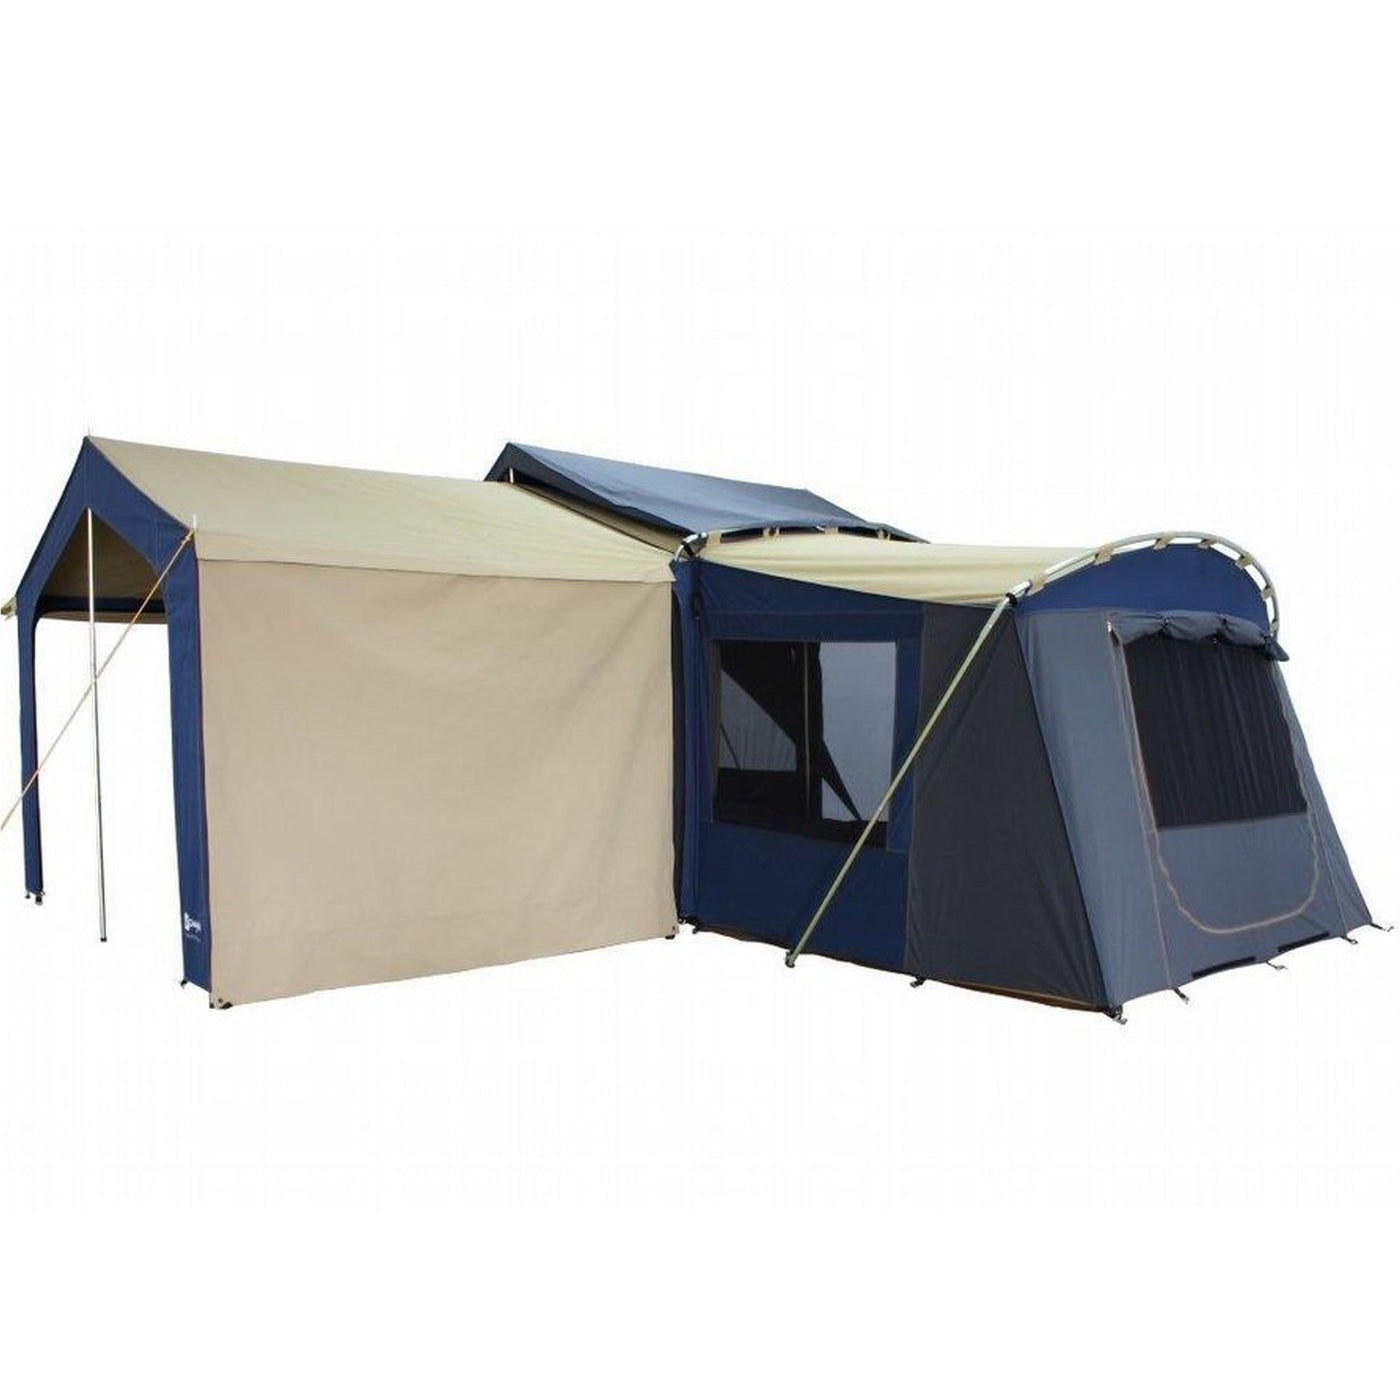 Optional Veranda awnings can also be pegged down and used as a windbreak.